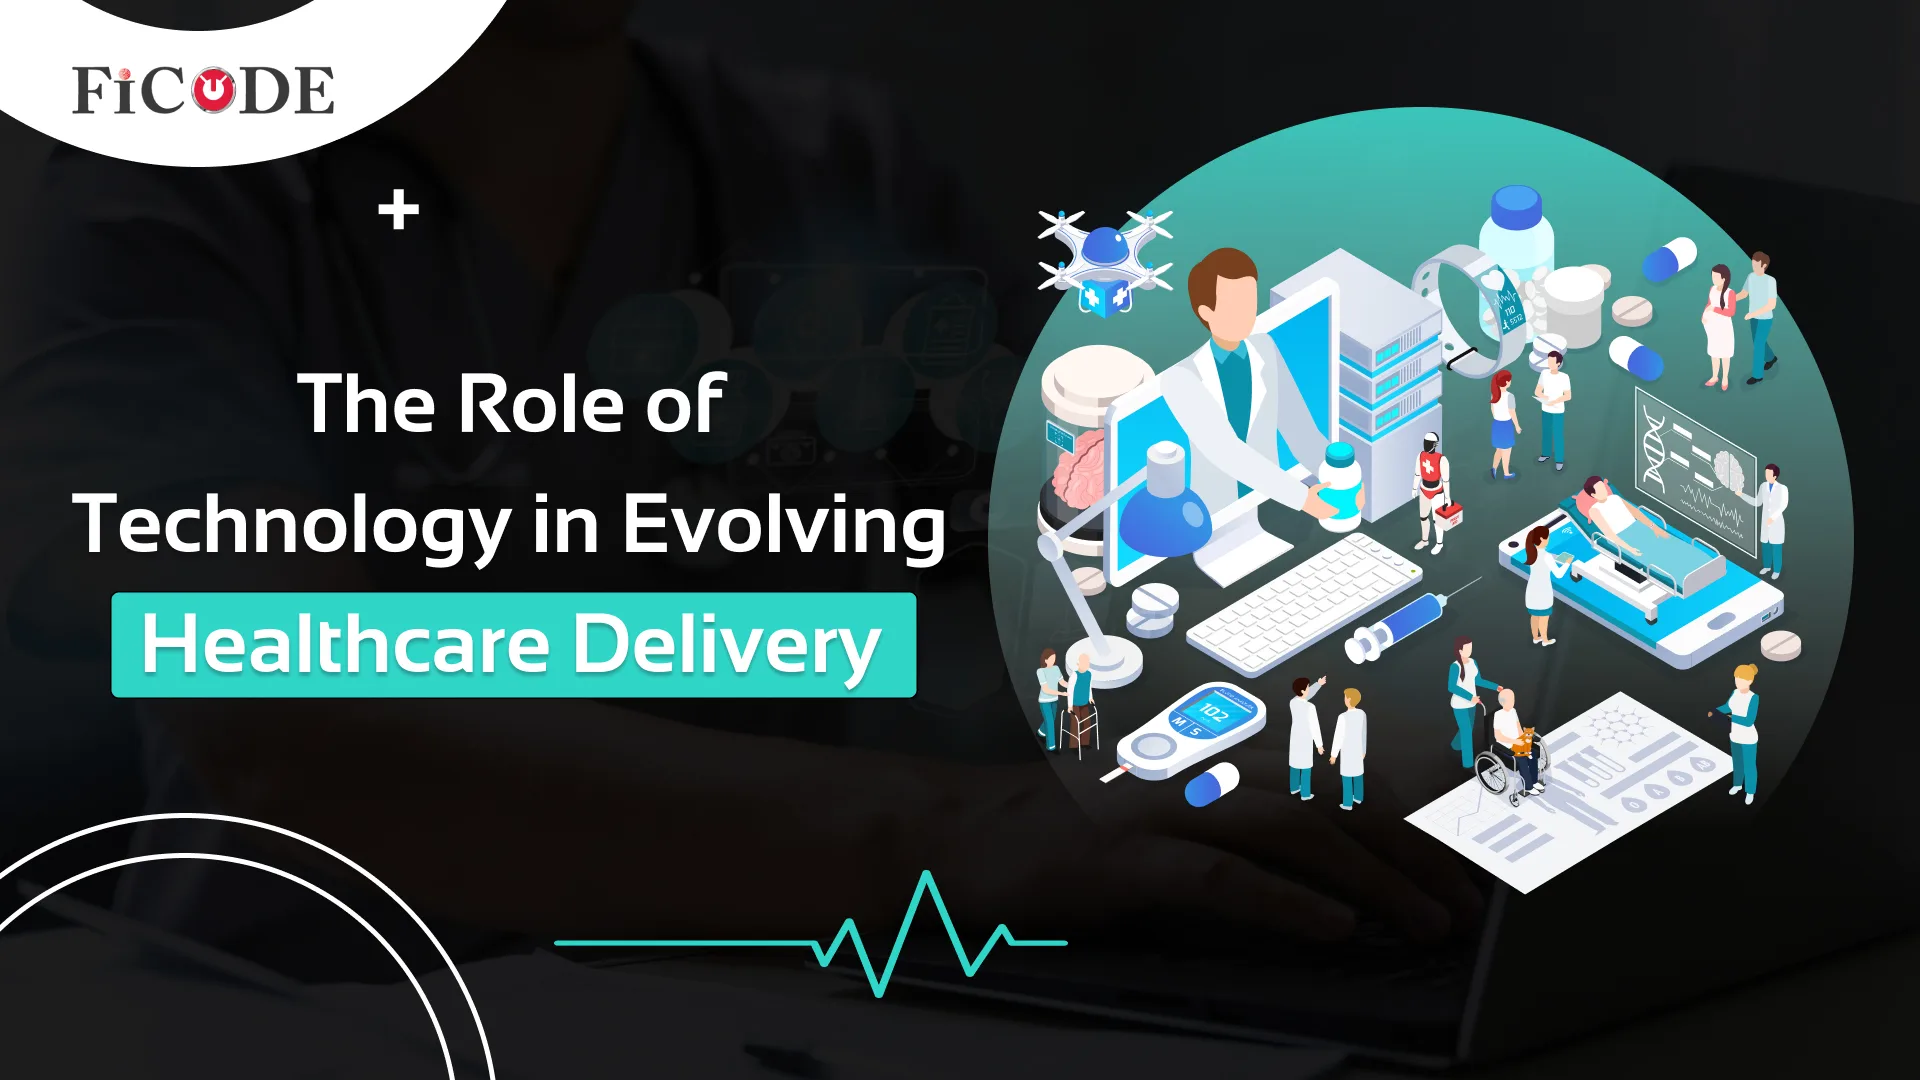 The Role of Technology in Evolving Healthcare Delivery